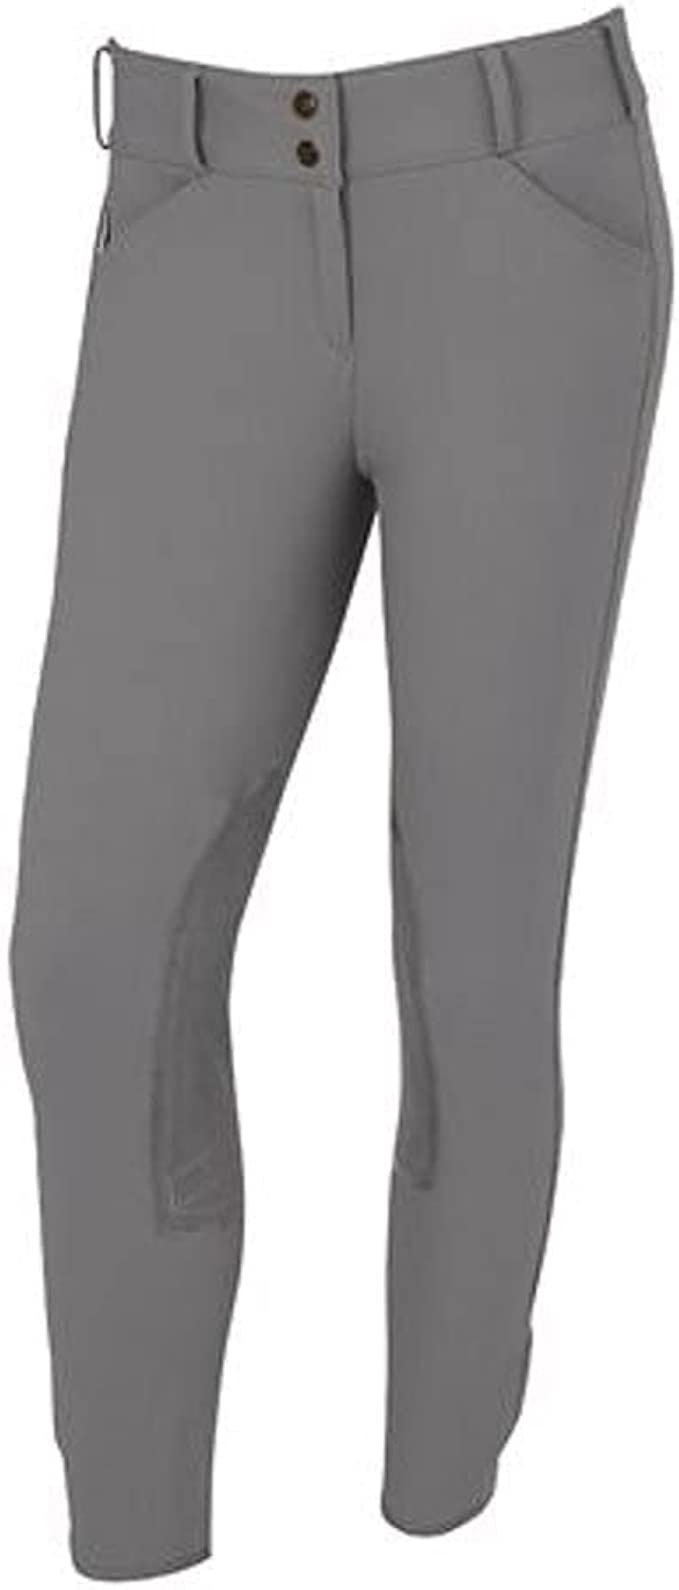 Tailored Sportsman Trophy Hunter Ladies Low Rise Front Zip Breeches Knee Patch Breeches Tailored Sportsman Pewter 34R 